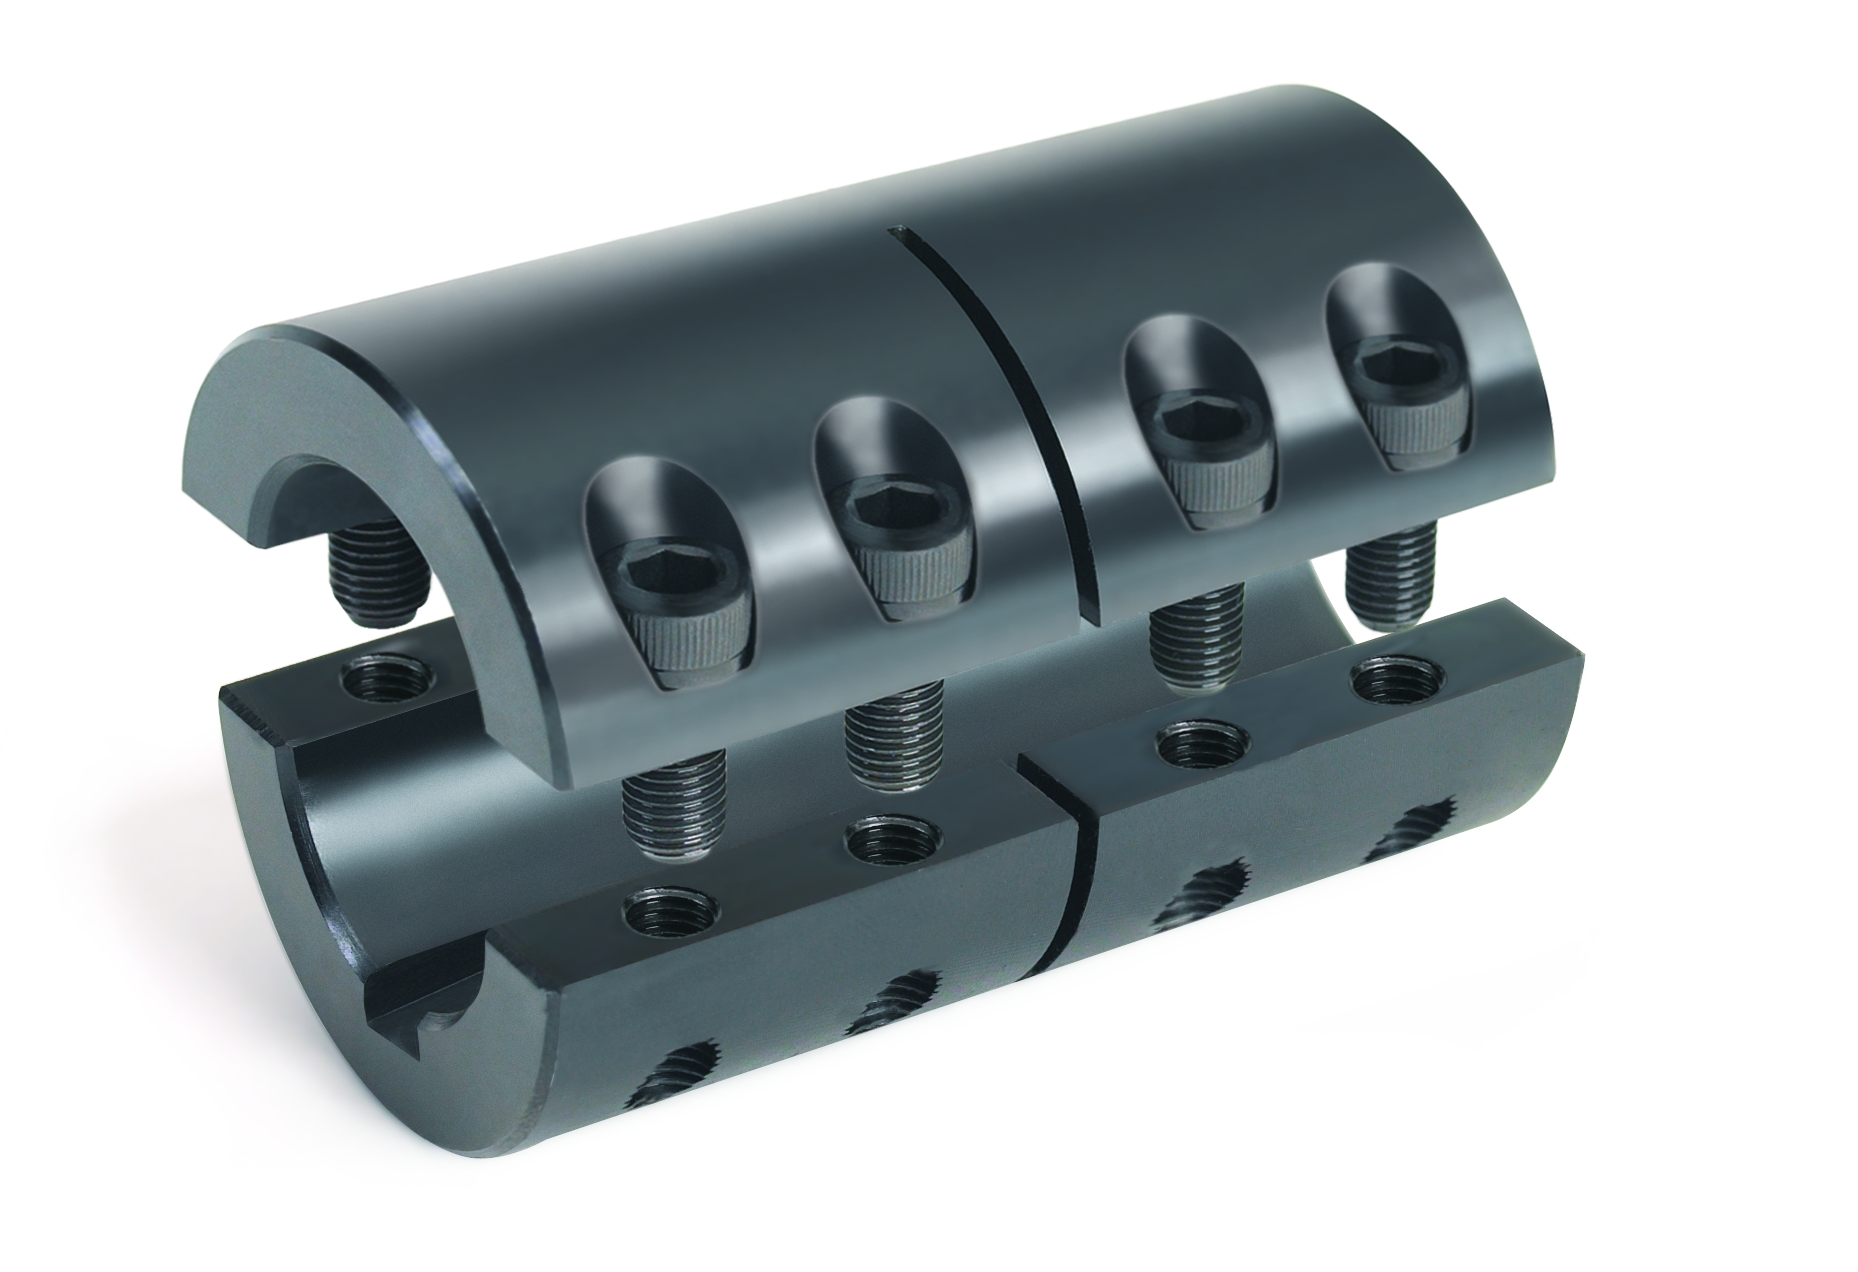 Side 1: 14 mm, Steel 2MISCC Series Metric Two-Piece Industry Standard Clamping Couplings w/Keyway 2MISCC-Series Black Oxide ASTM A108 Climax Metal Products 2MISCC-14-14-KW Bore 